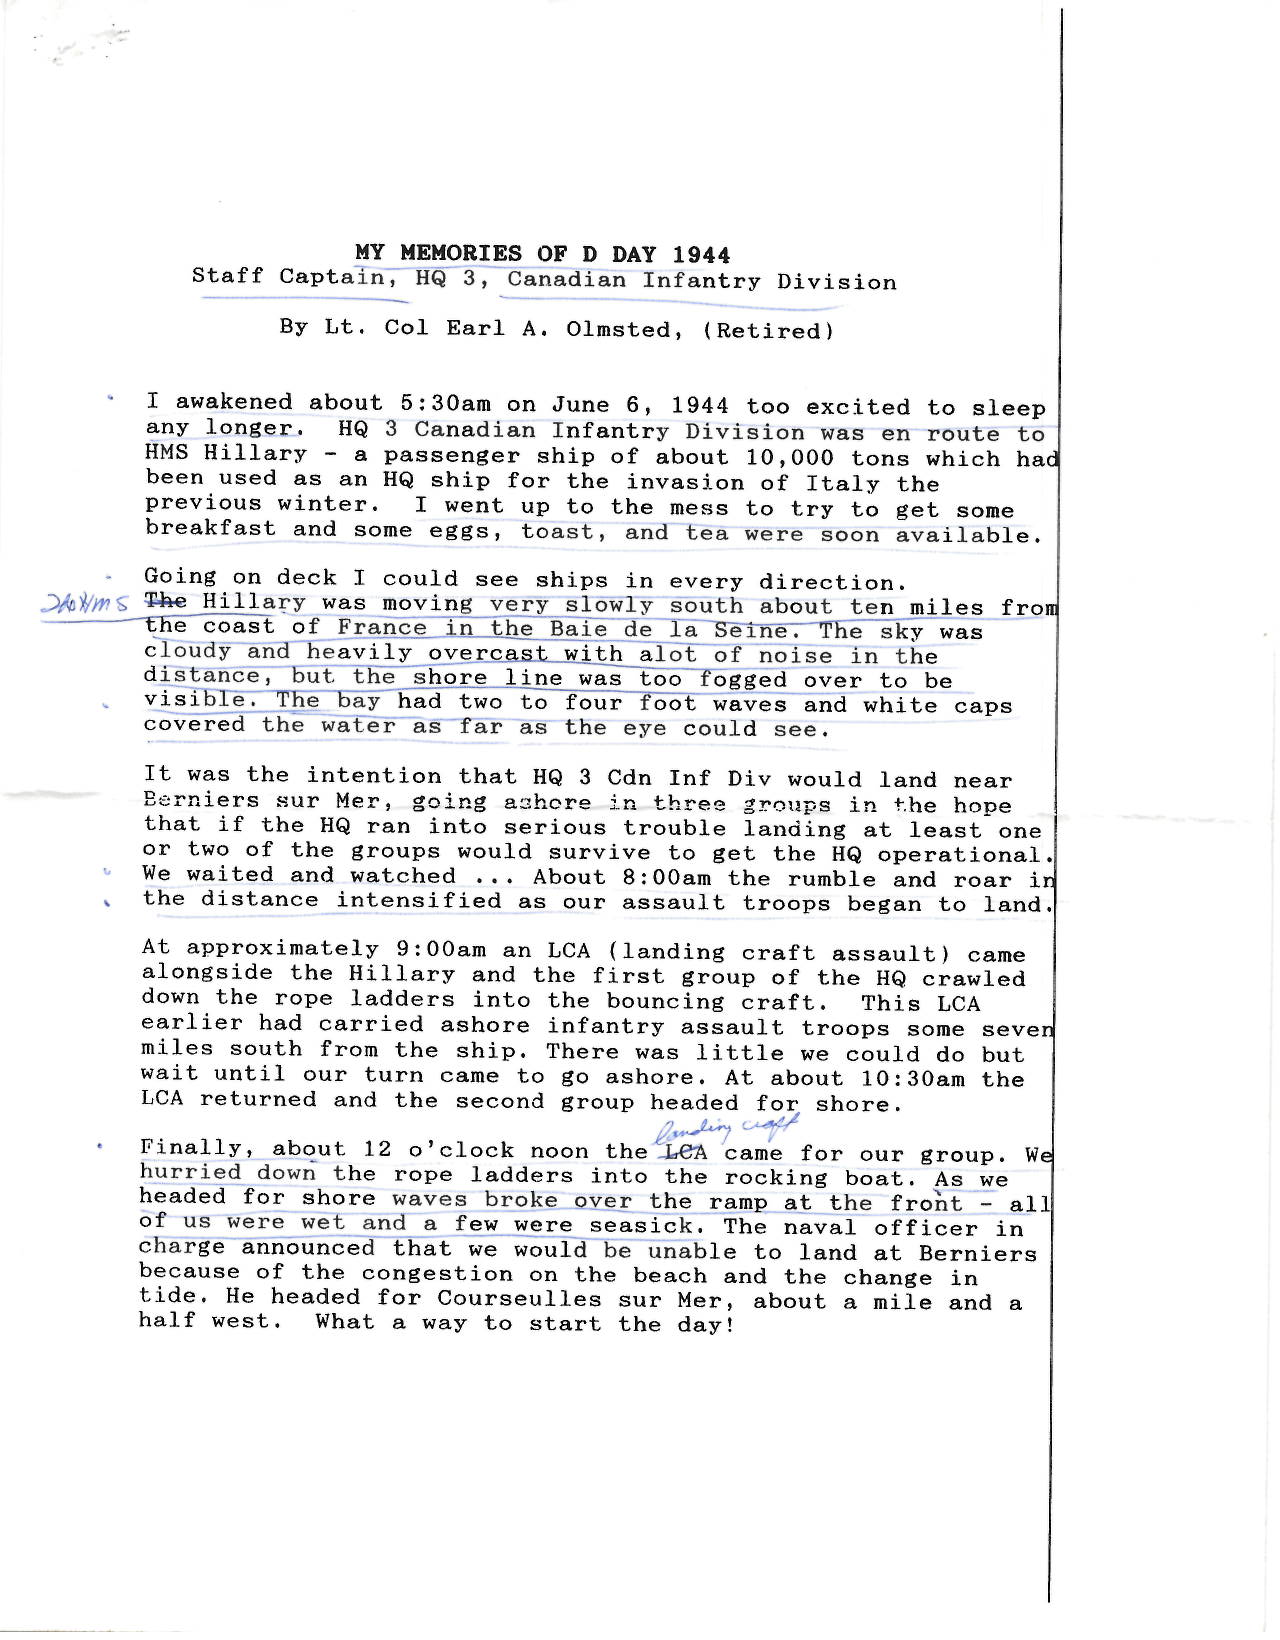 E. A. Olmsted D-Day Account  (Funeral Reading)_Page_1.jpg